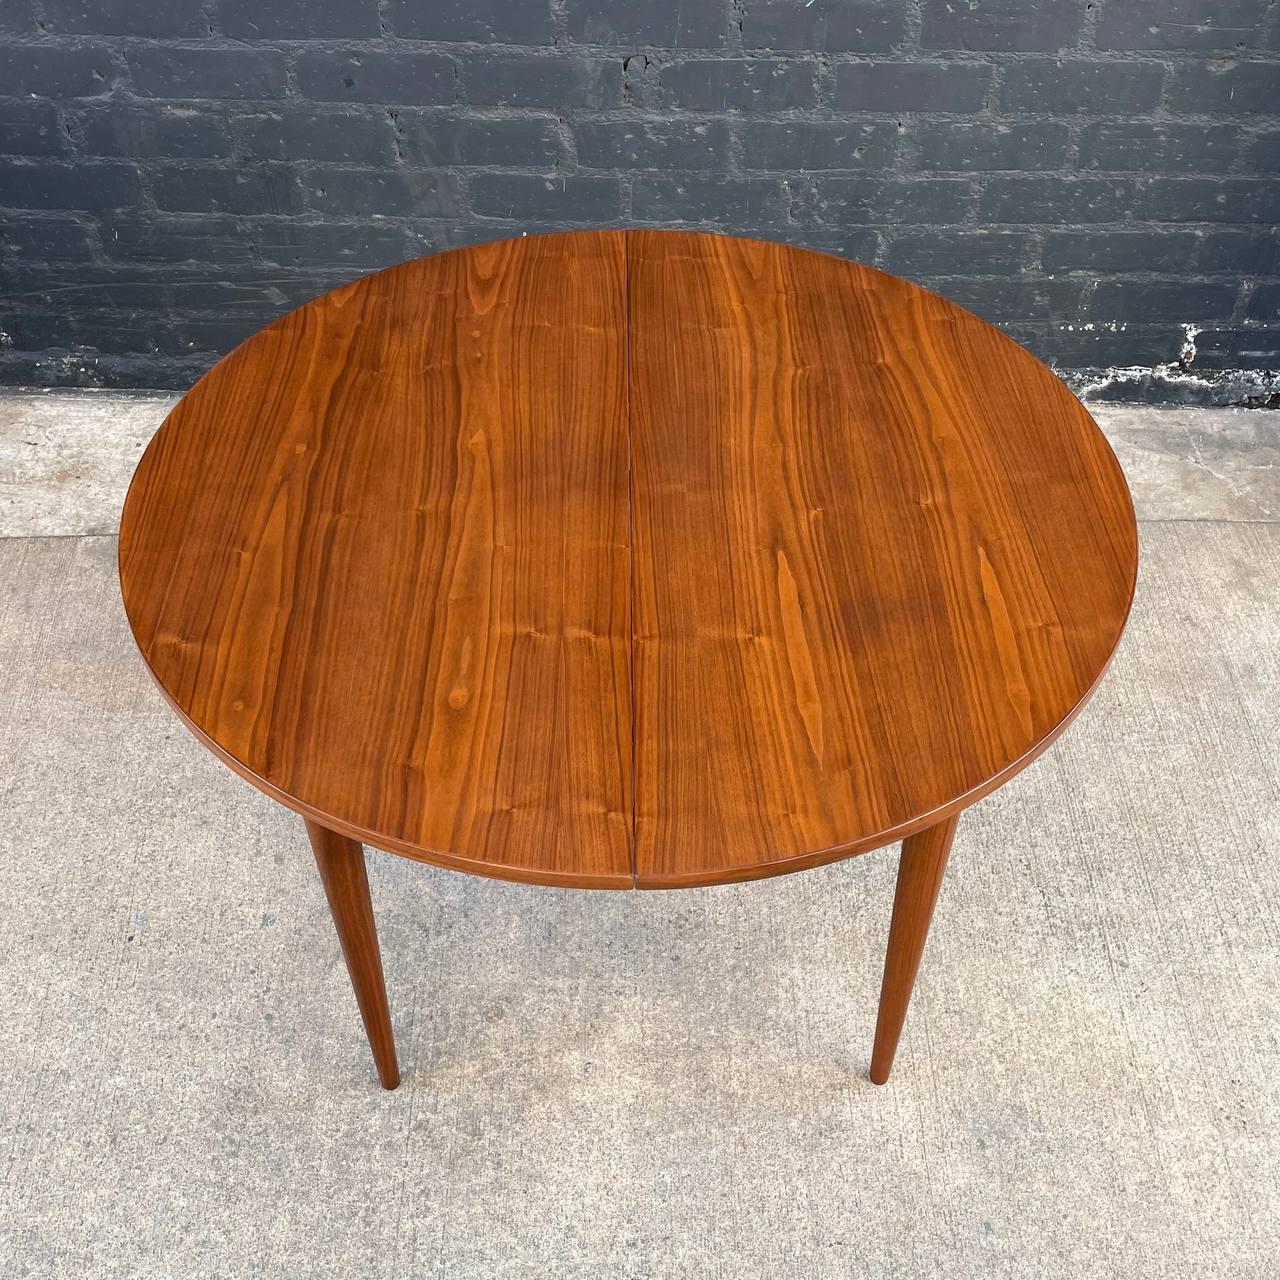 Newly Refinished - Expanding Mid-Century Modern Round Walnut Dining Table 1